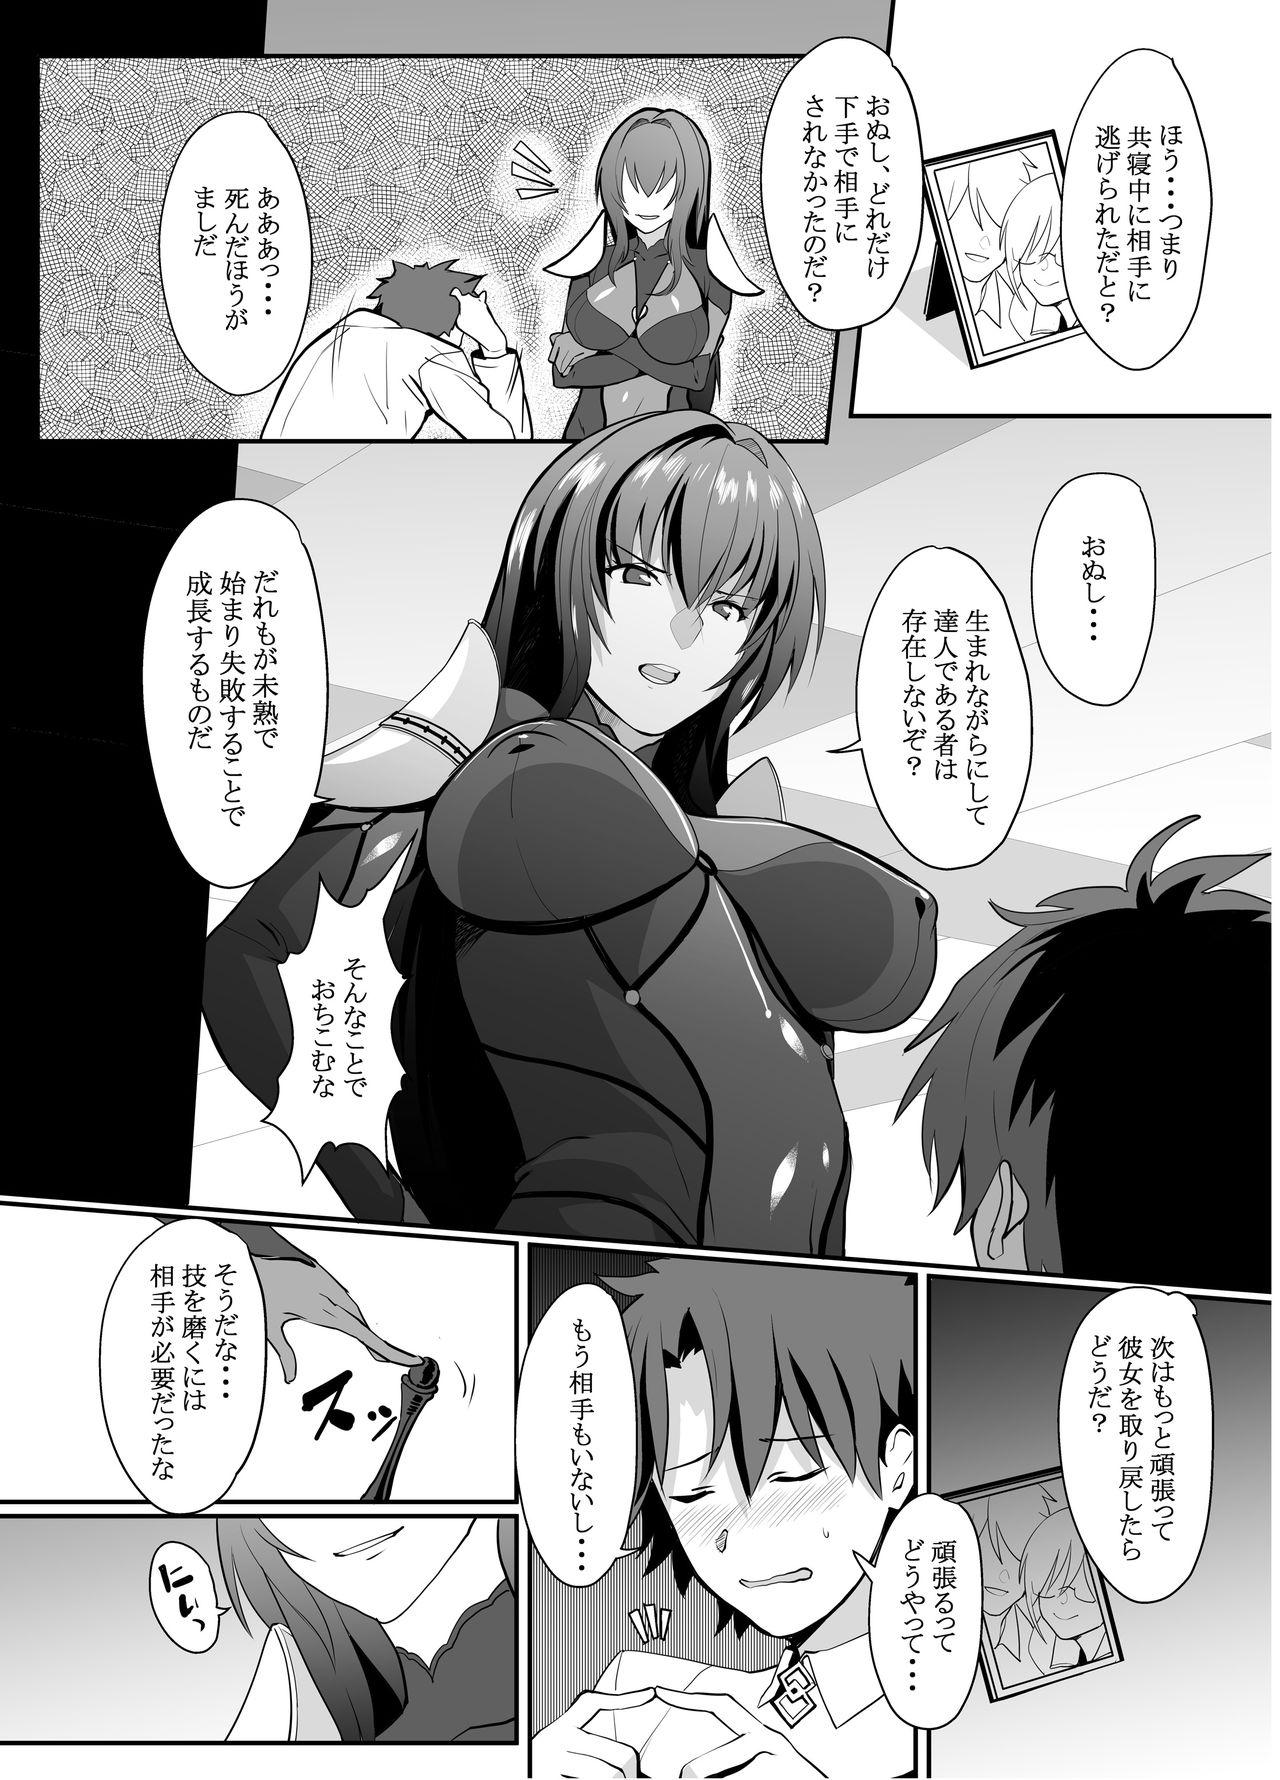 Gagging Scathach Shishou no Dosukebe Lesson - Fate grand order Viet Nam - Page 4